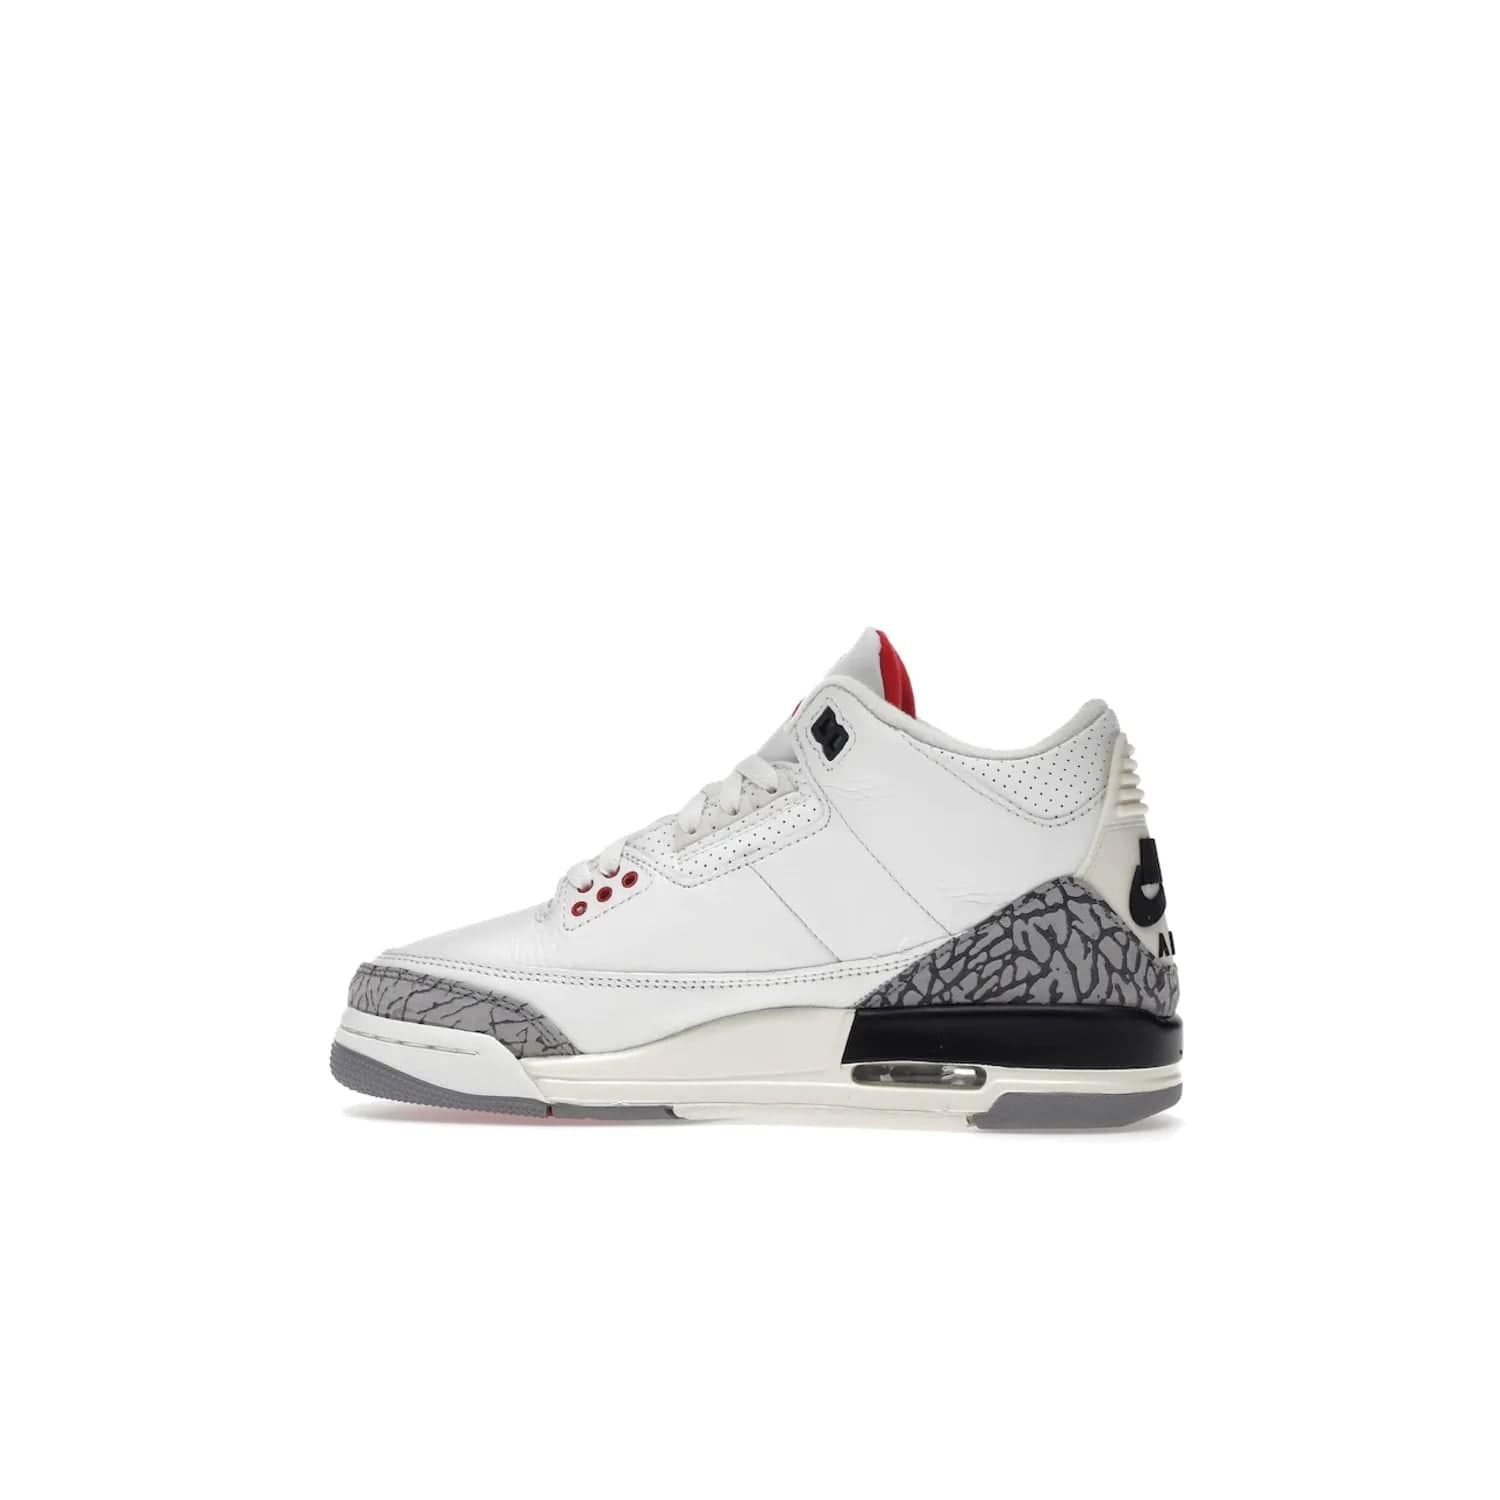 Jordan 3 Retro White Cement Reimagined (GS) - Image 20 - Only at www.BallersClubKickz.com - Grab the perfect blend of modern design and classic style with the Jordan 3 Retro White Cement Reimagined (GS). Features Summit White, Fire Red, Black, and Cement Grey colorway, iconic Jordan logo embroidered on the tongue, and “Nike Air” branding. Limited availability, get your pair before March 11th 2023.